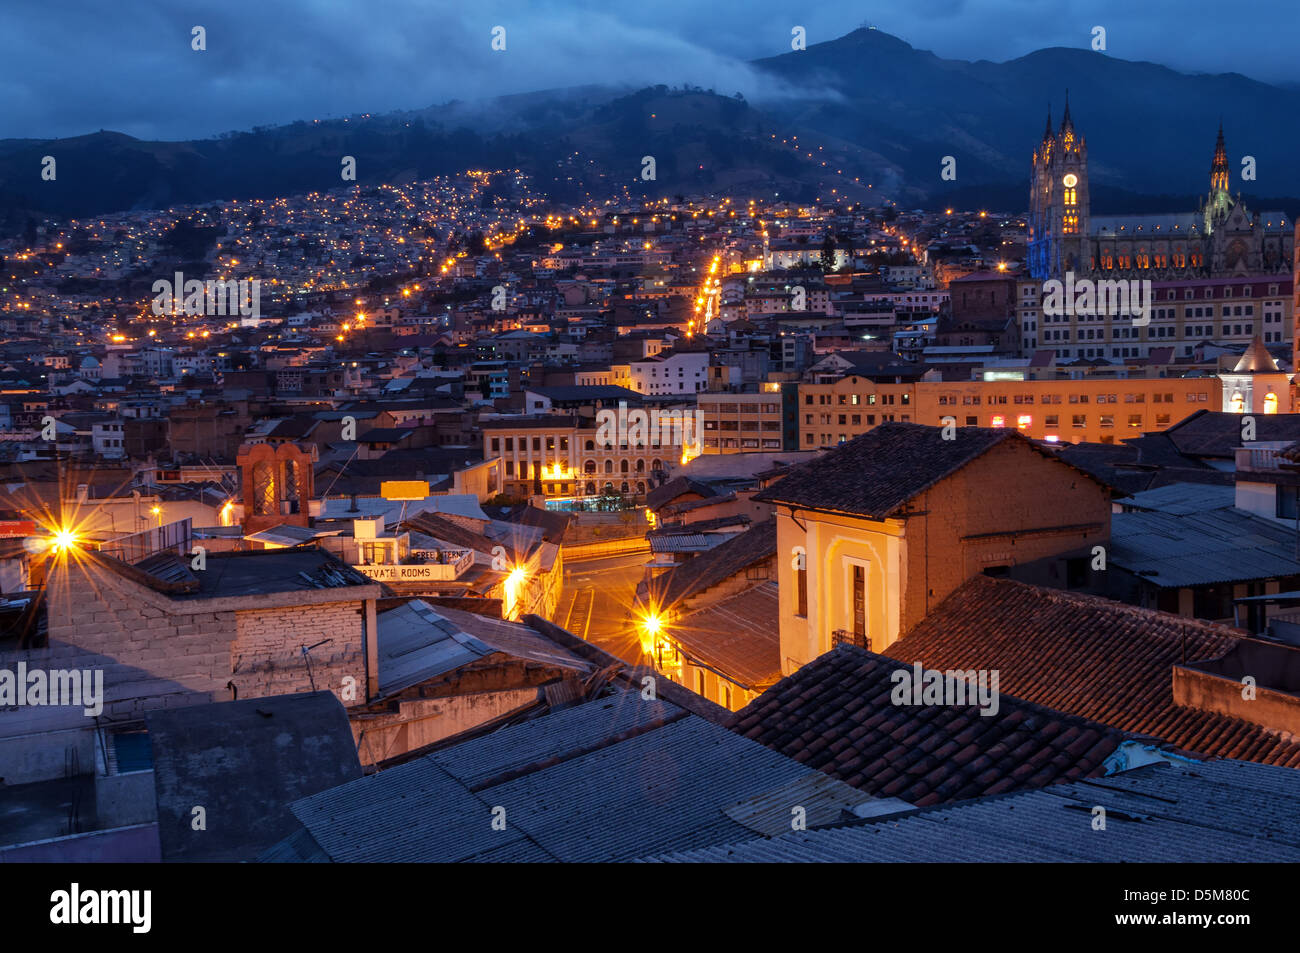 Quito, Ecuador old town and basilica at night with mountains in the background Stock Photo